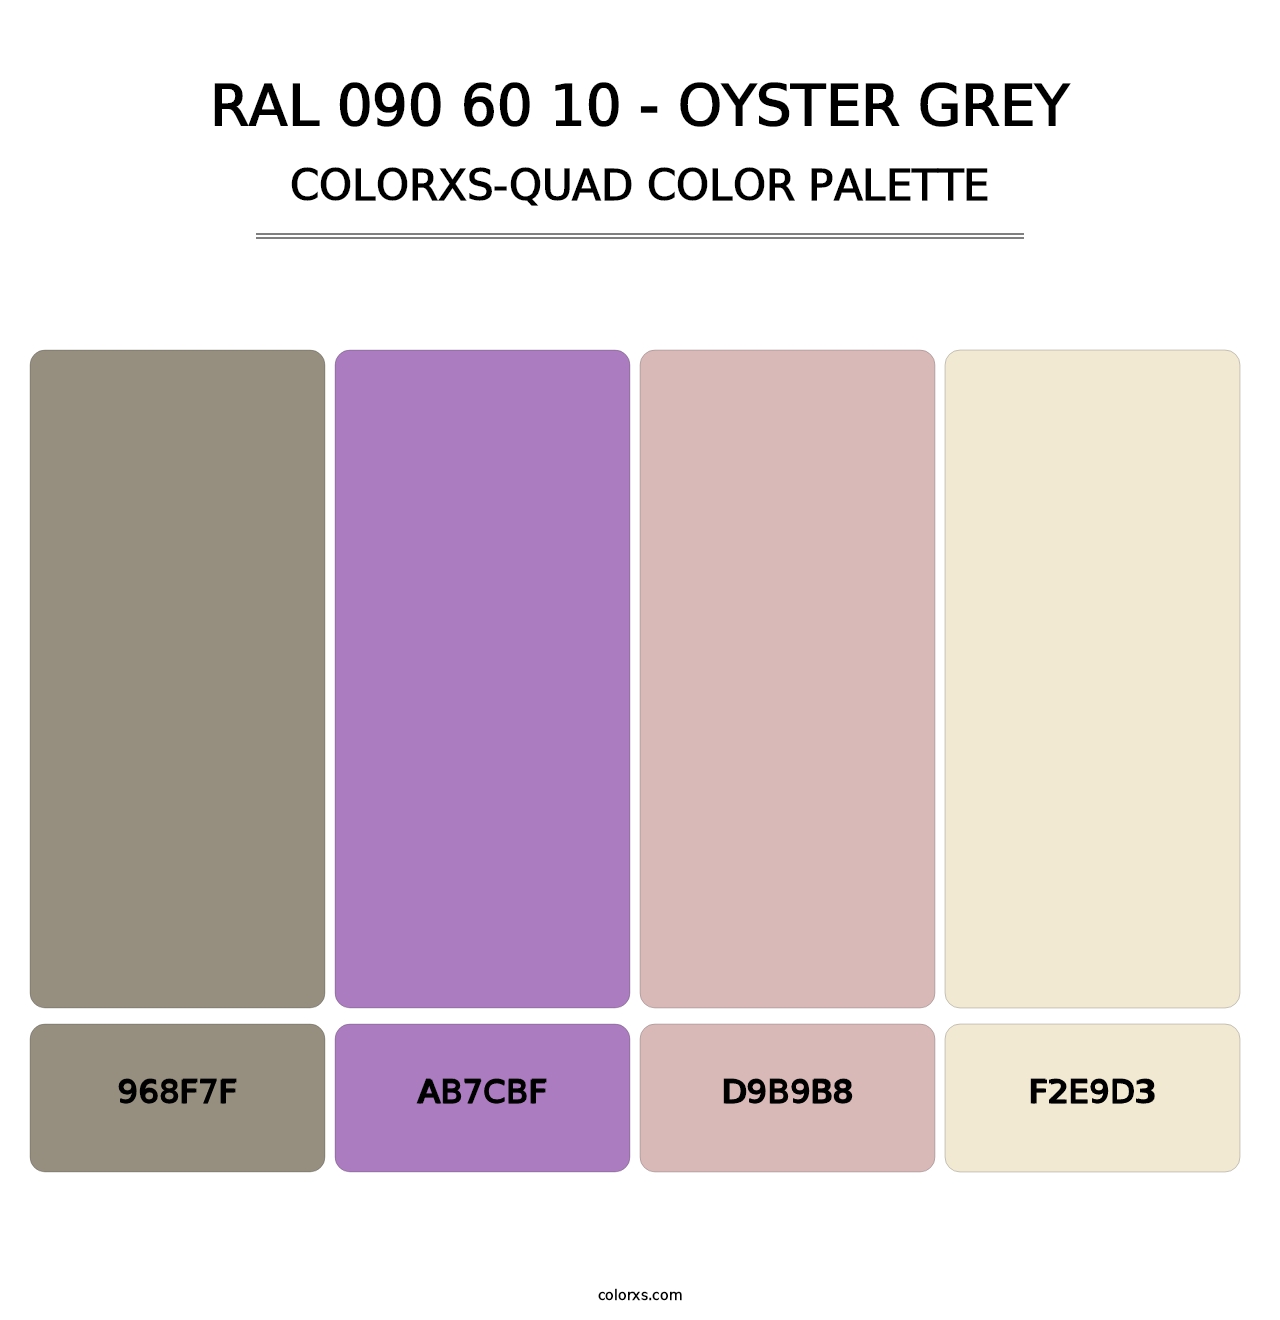 RAL 090 60 10 - Oyster Grey - Colorxs Quad Palette